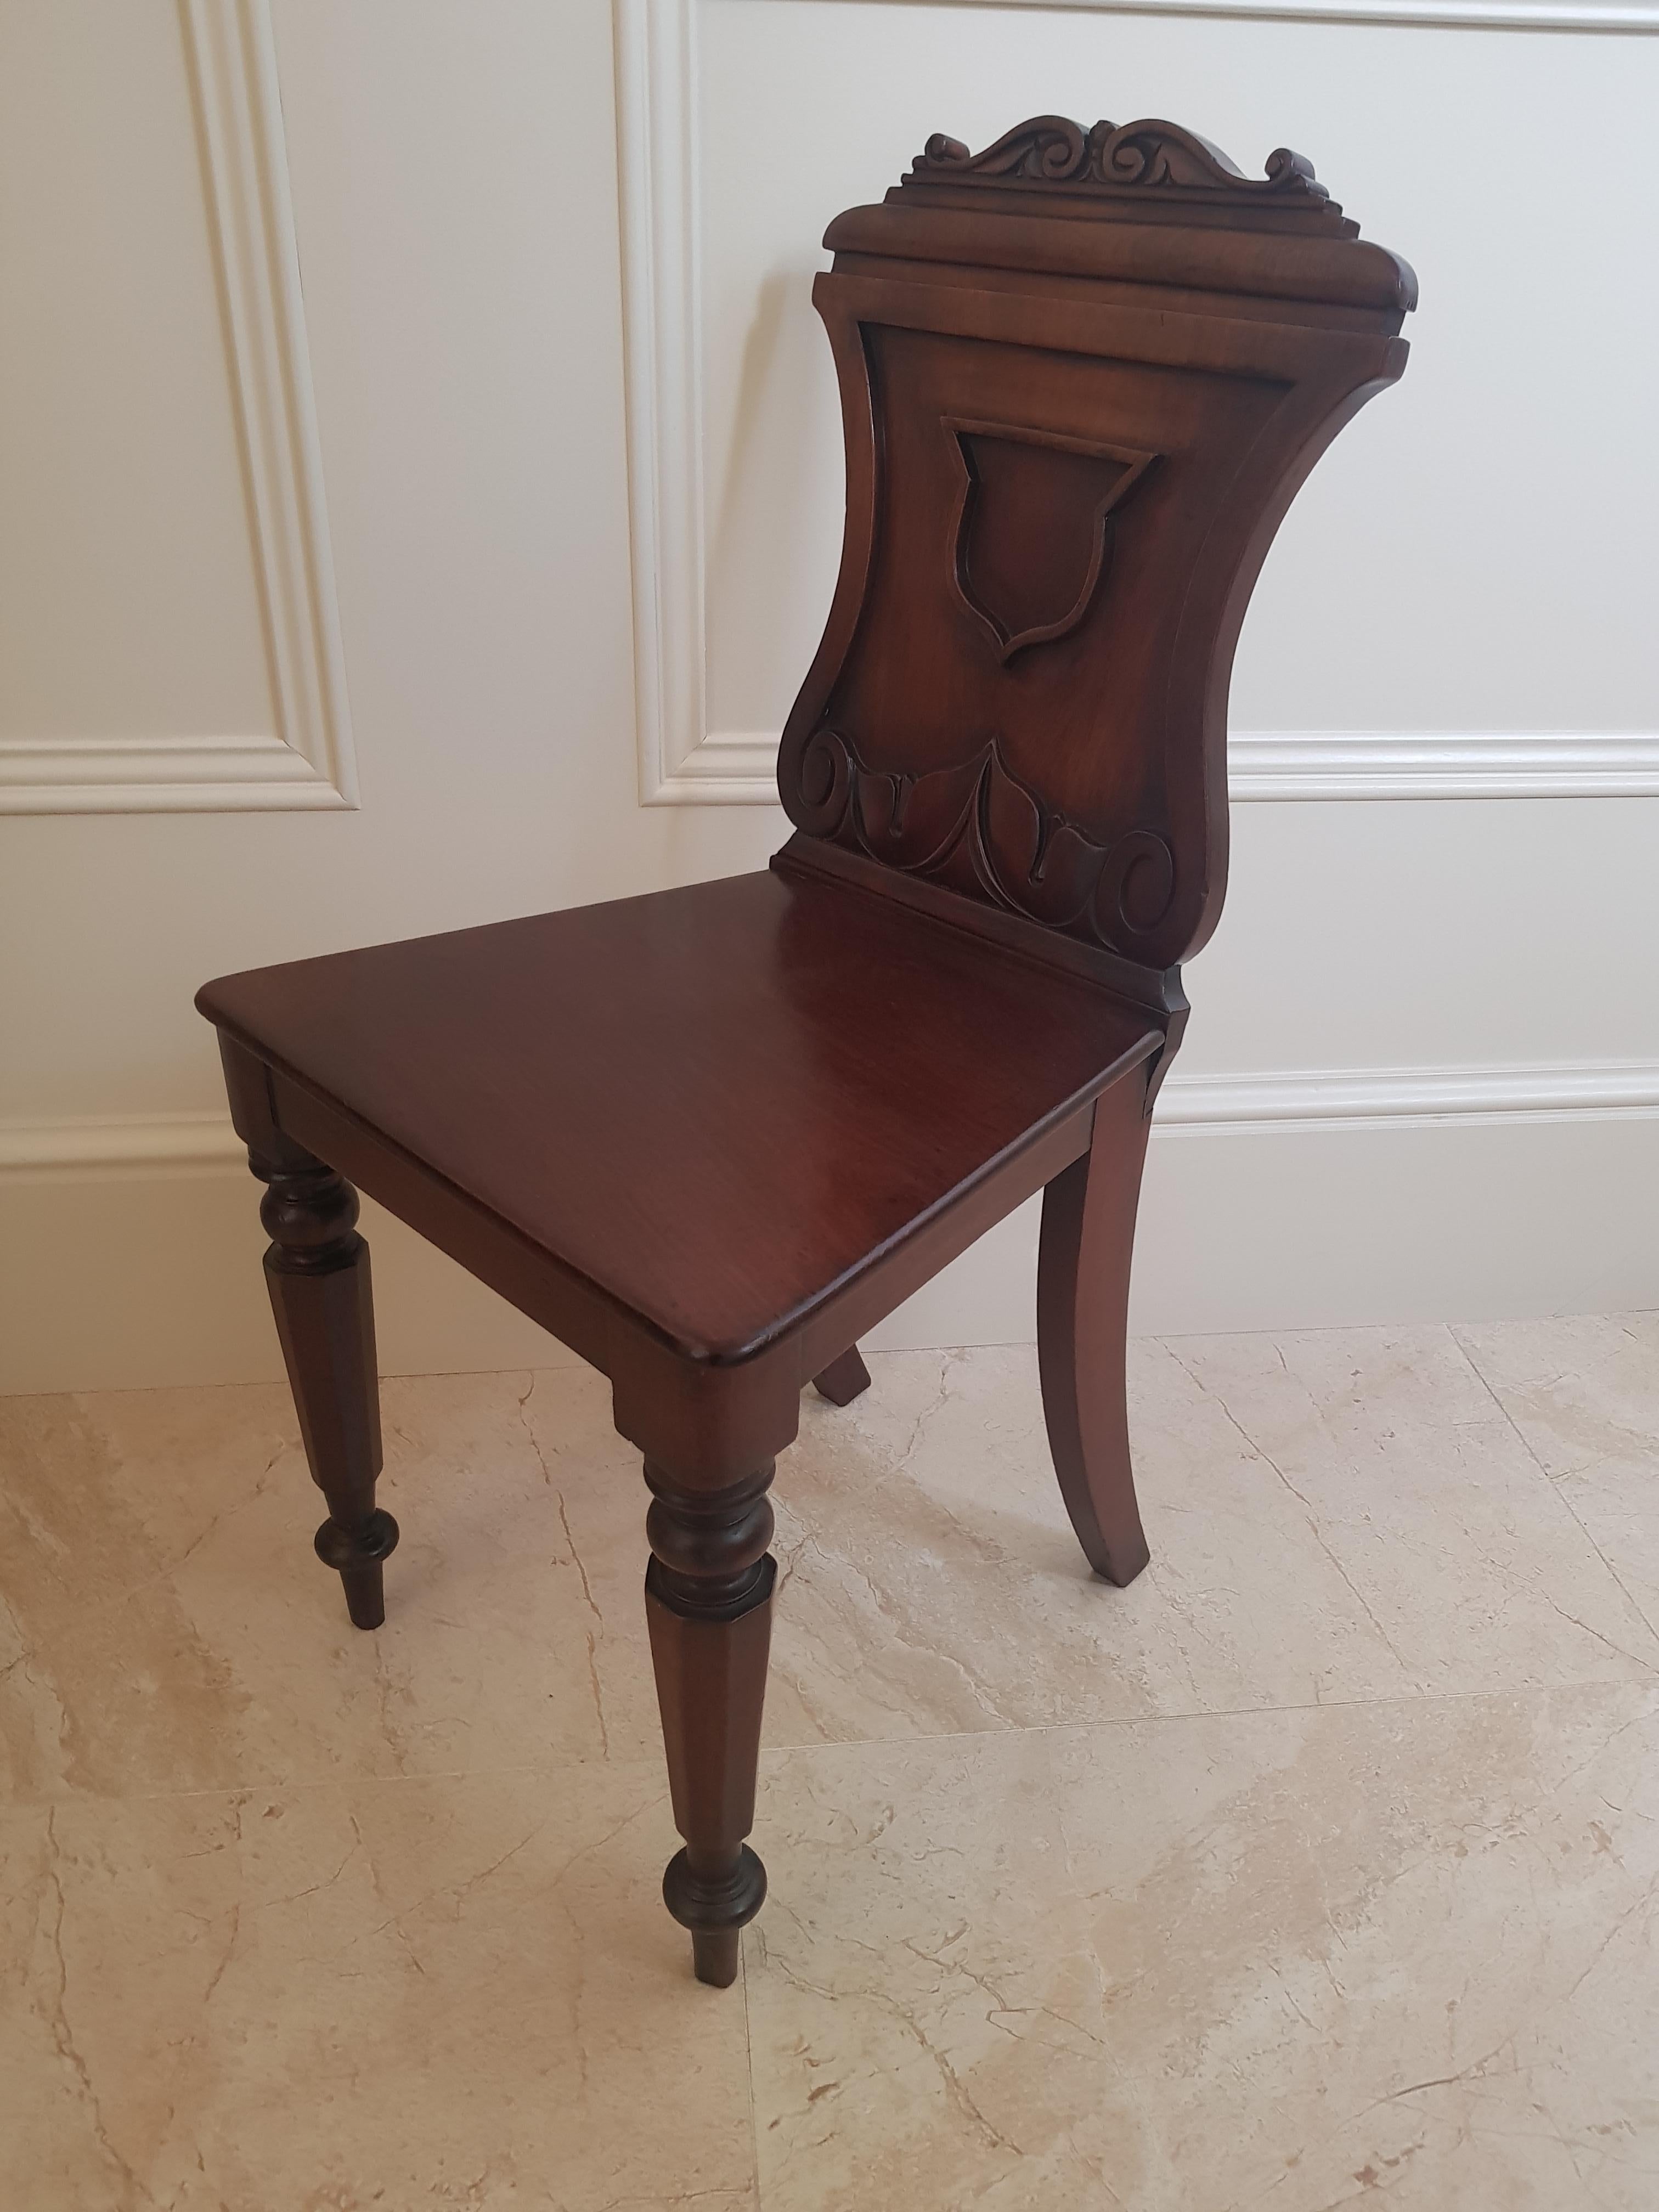 A Regency period mahogany hall chair, with excellent timbers and patina.